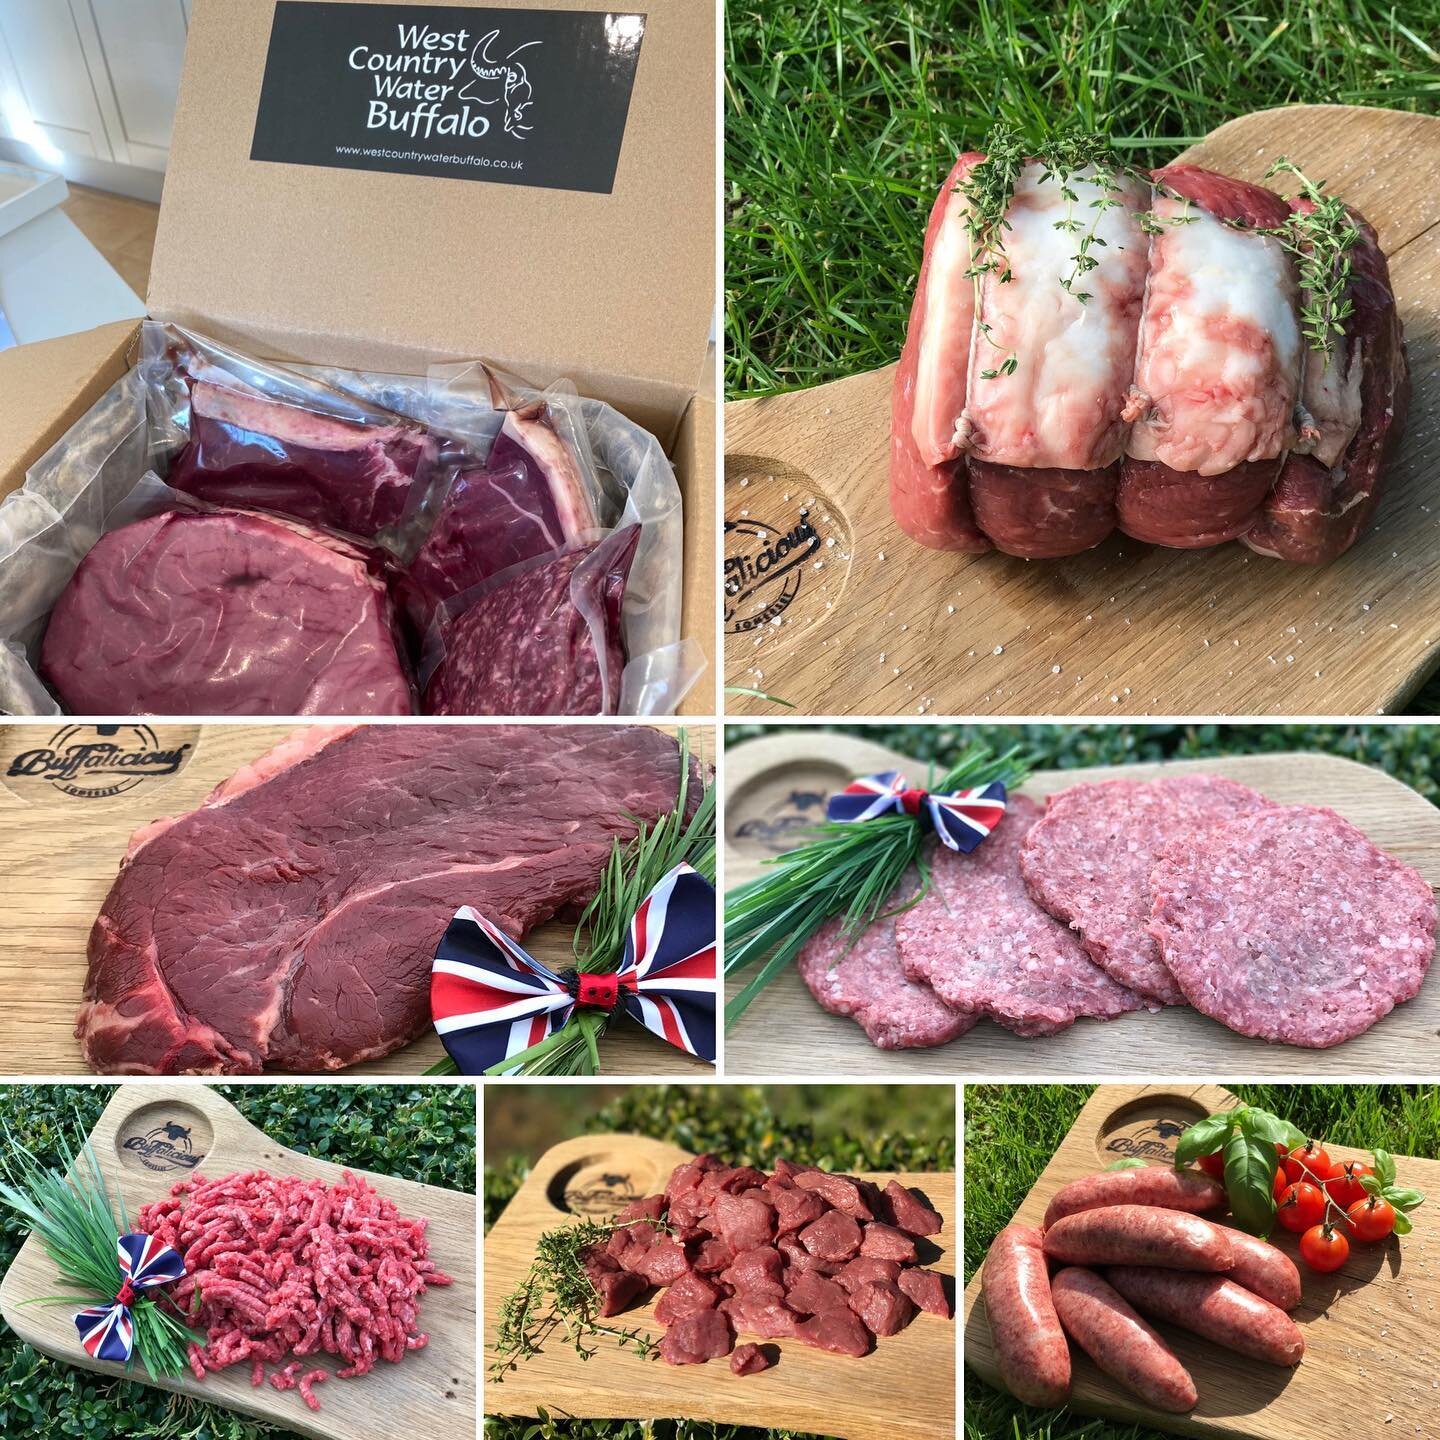 Welcome to our &ldquo;Introductory BUFF meat box&rdquo; Available to order now! We thought it was about time to offer our delicious grass fed, slow grown water buffalo meat to everyone in a simple introductory delivery box. Containing 2 x pk of mince